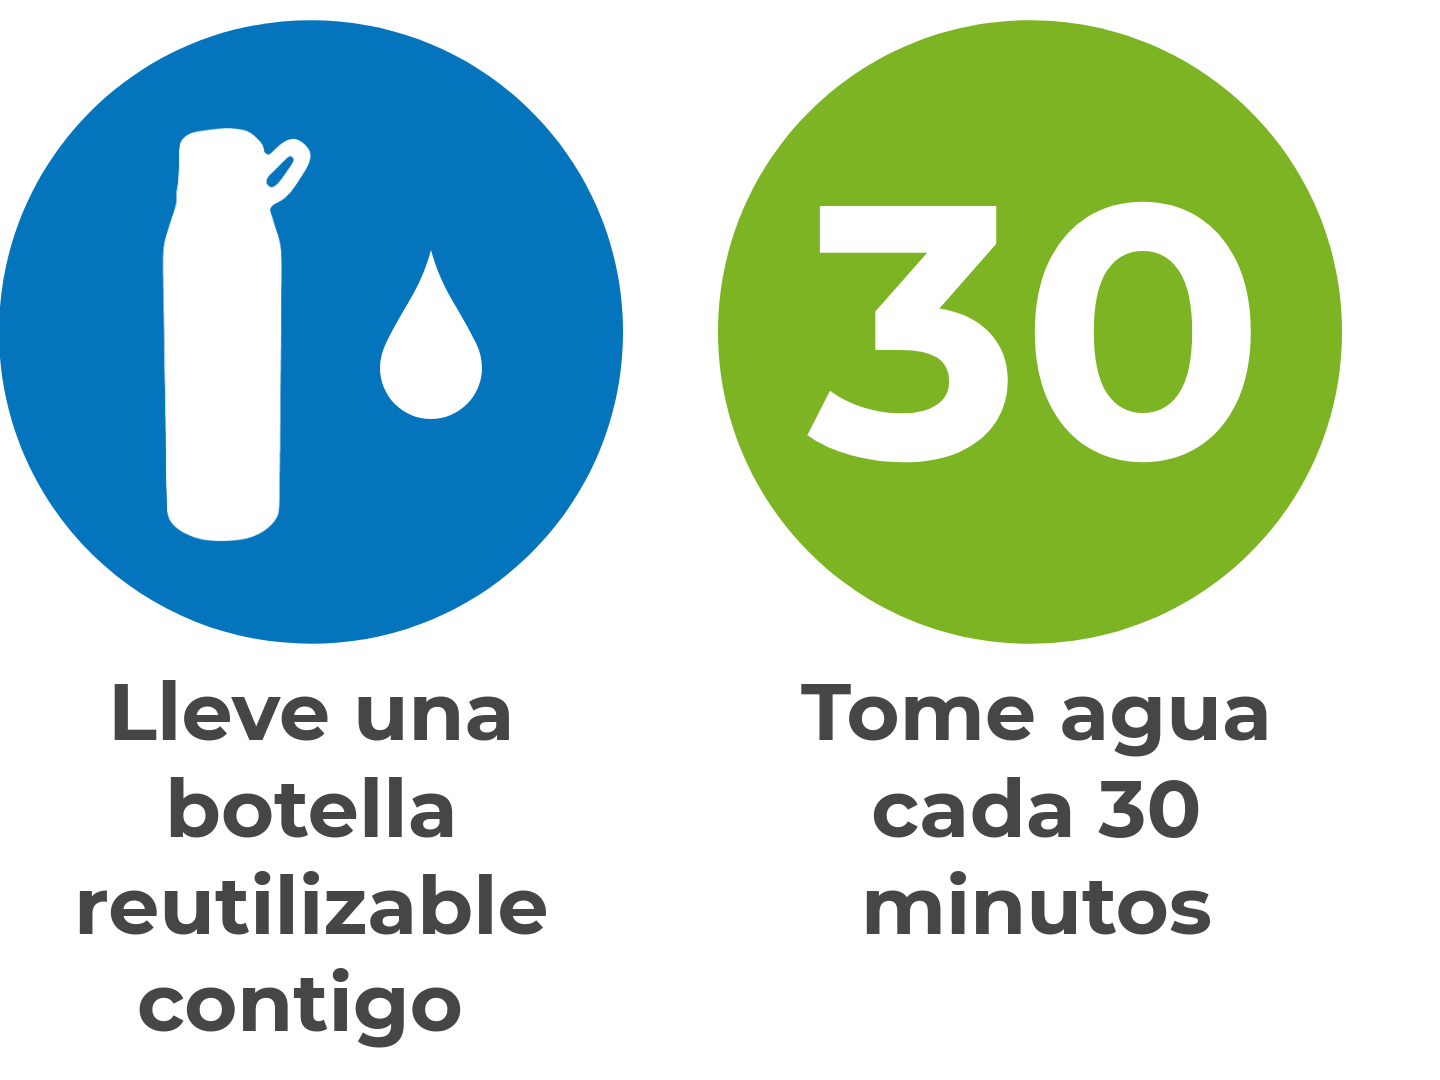 Carry a  refillable water bottle and Drink water every 30 minutes